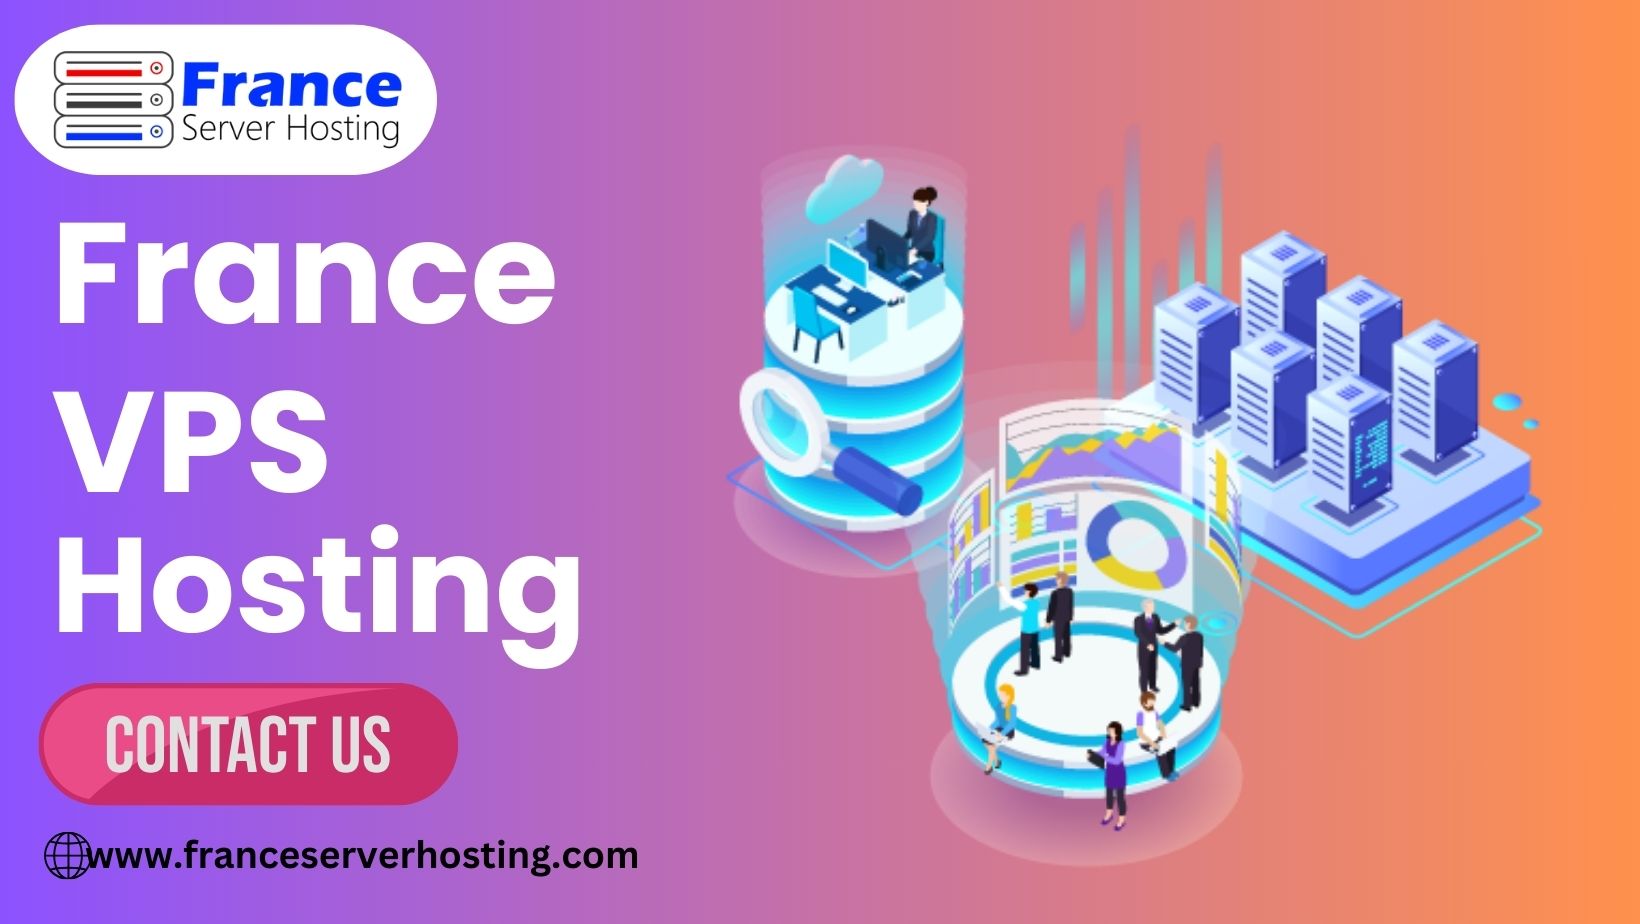 France VPS Hosting offers a significant performance boost compared to shared hosting. With a VPS, you have dedicated resources allocated to your website, ensuring consistent and reliable performance. This is especially important for e-commerce websites, high-traffic blogs, and other resource-intensive applications.